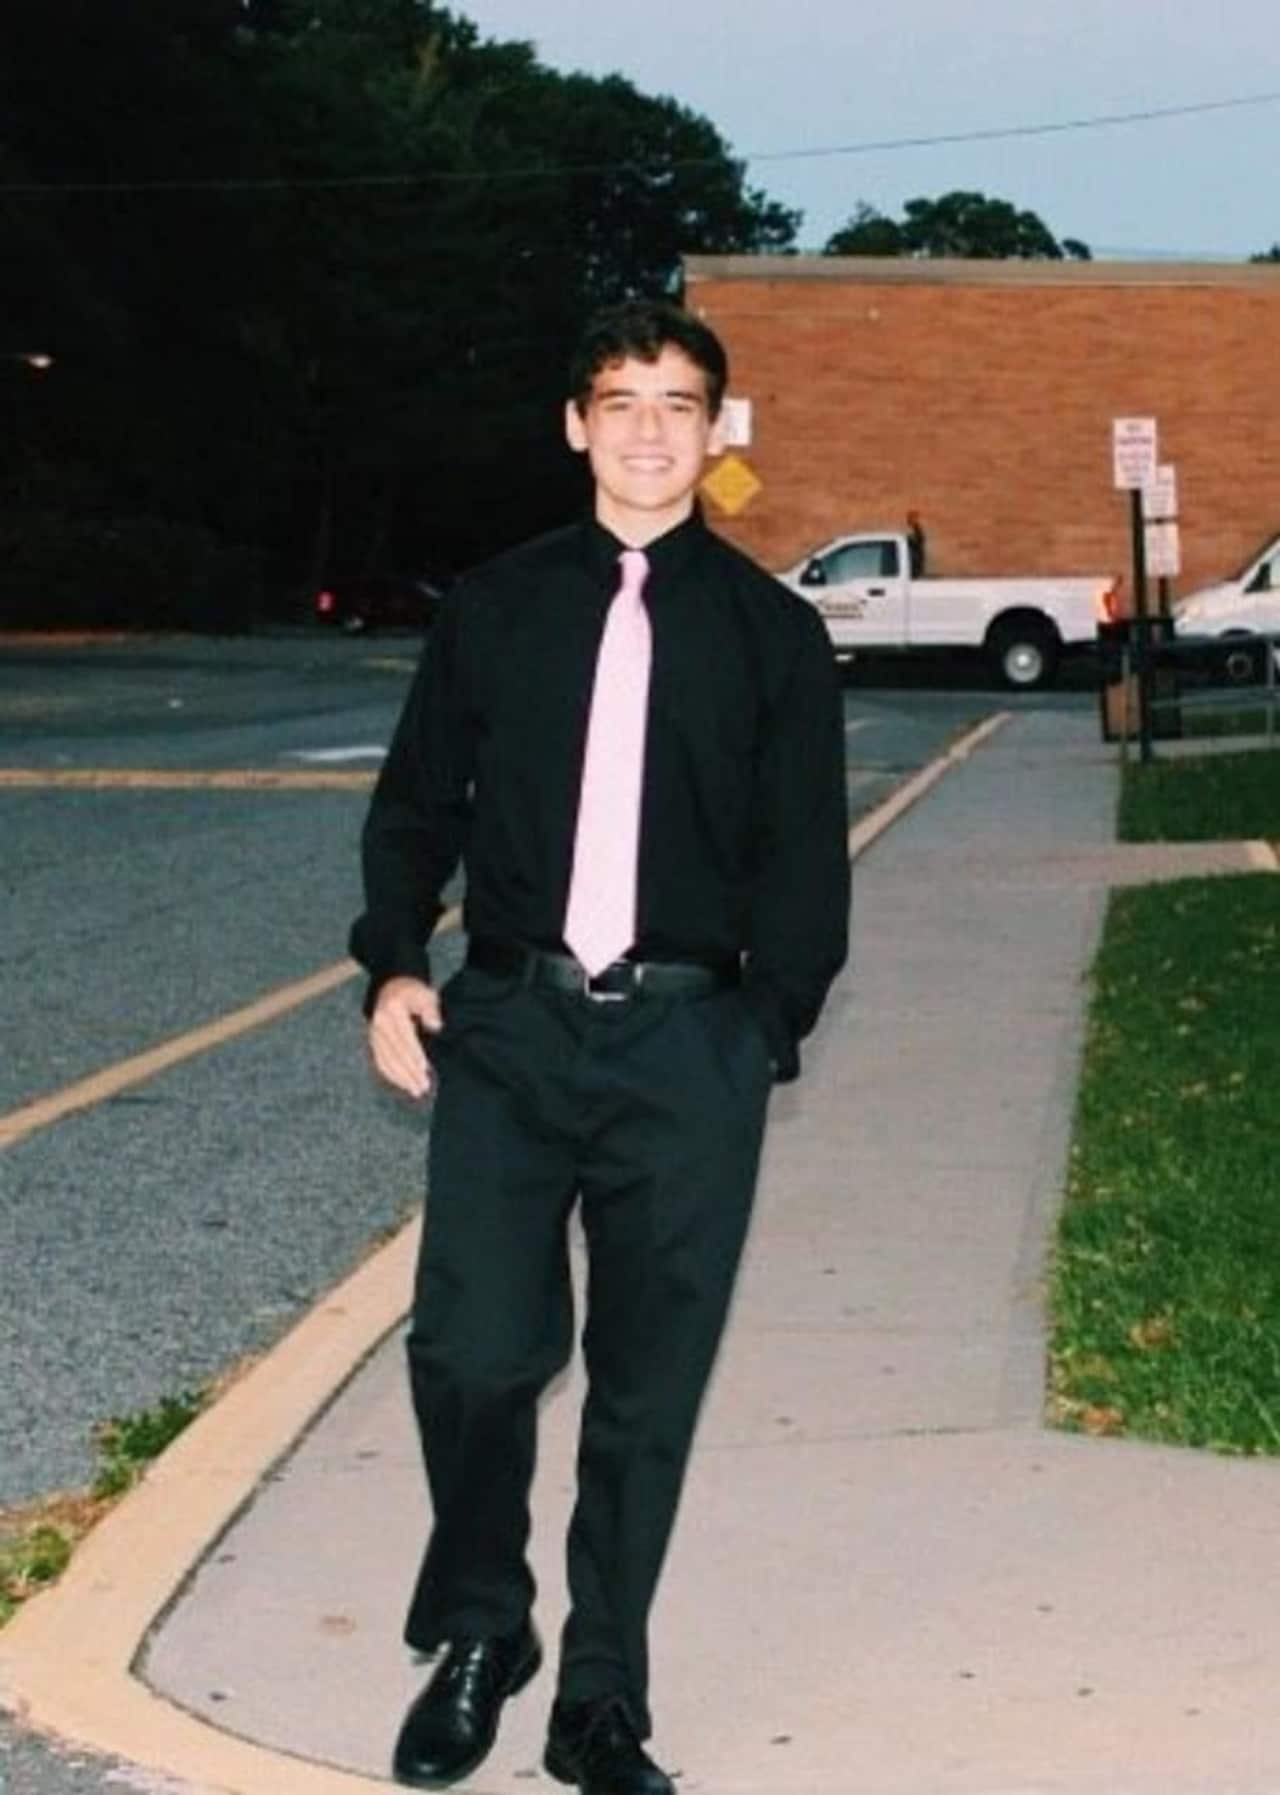 Saddle Brook's Andrew Gutierrez died suddenly.